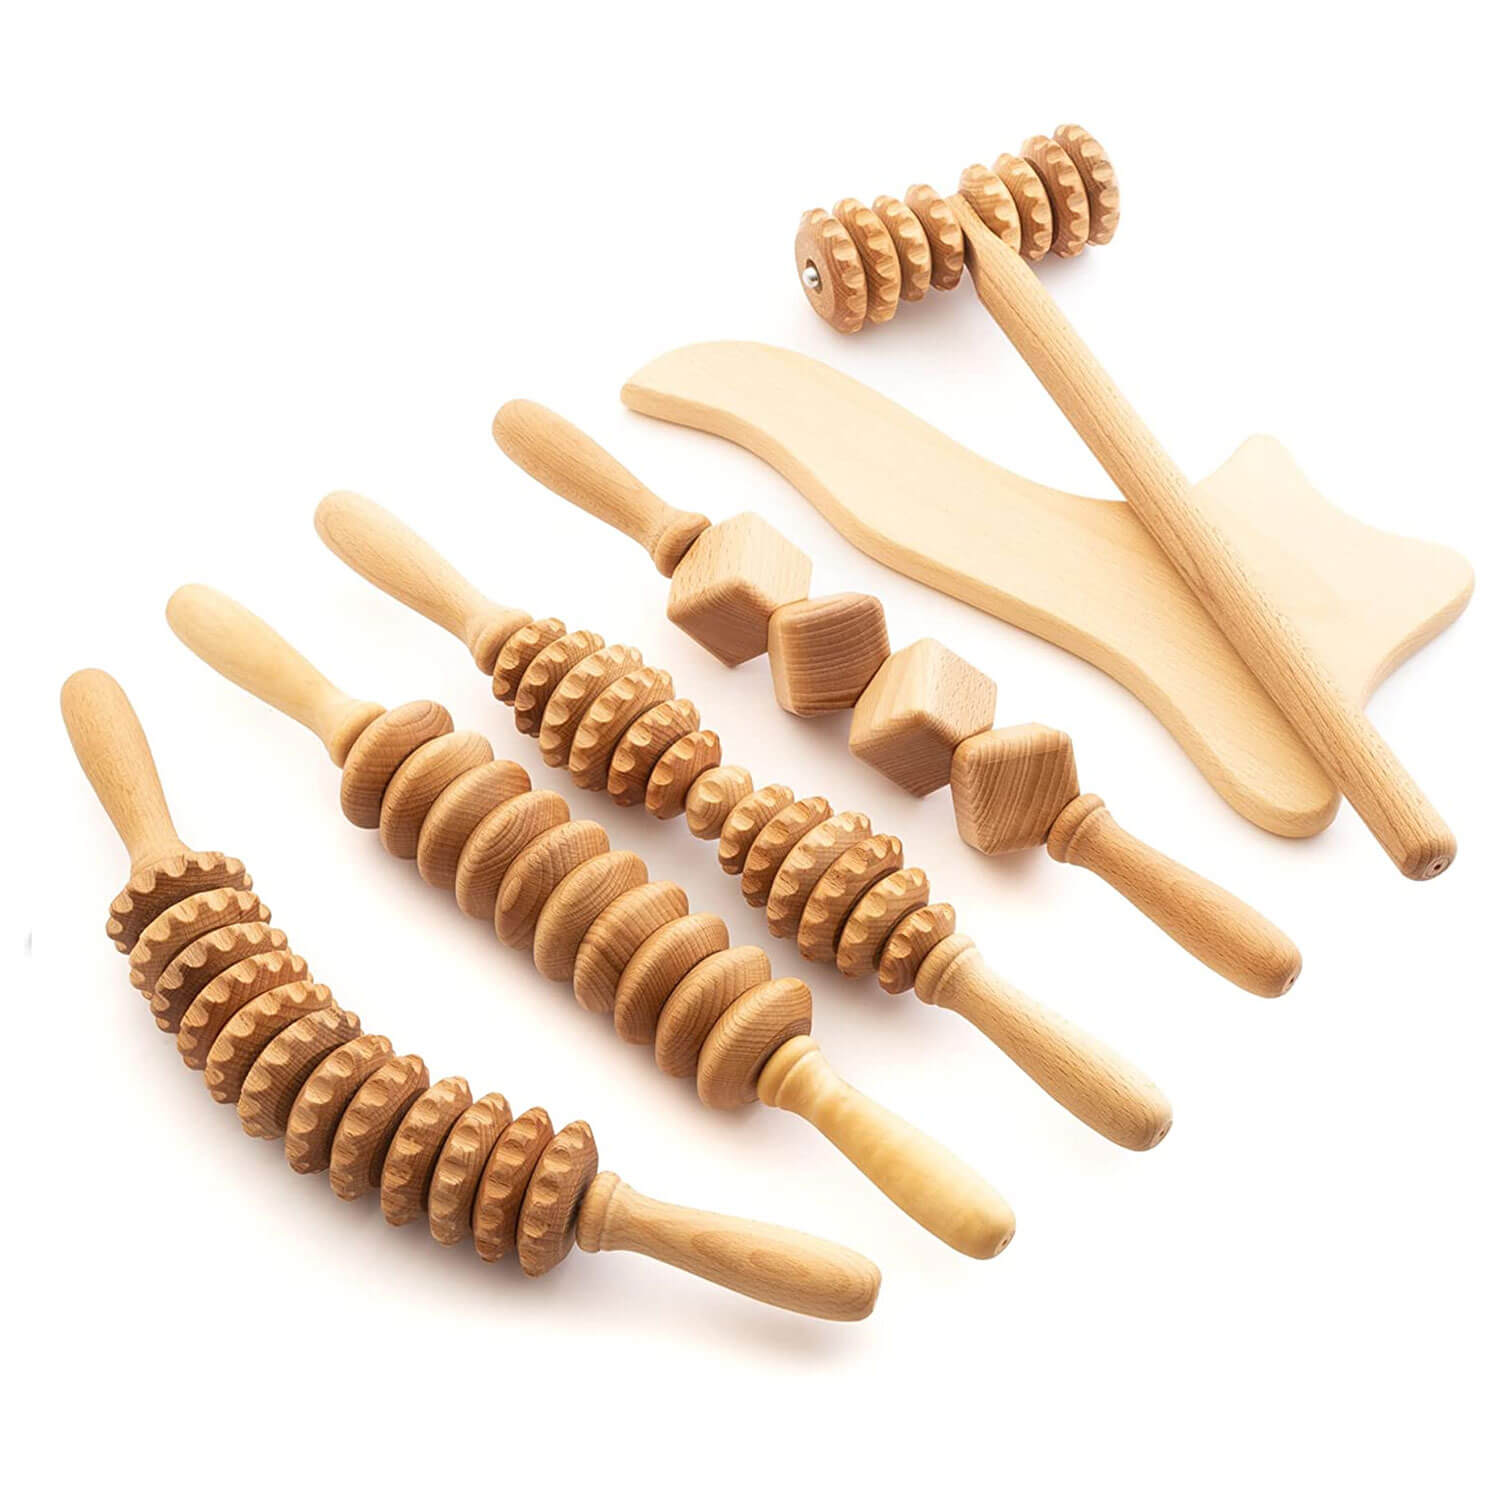 Tuuli Wooden Massage Roller Set - Maderotherapy Massage Stick For Removing  Fat Dimples, Relaxing Muscles, Self-Care - Wood Roller Massager For Body